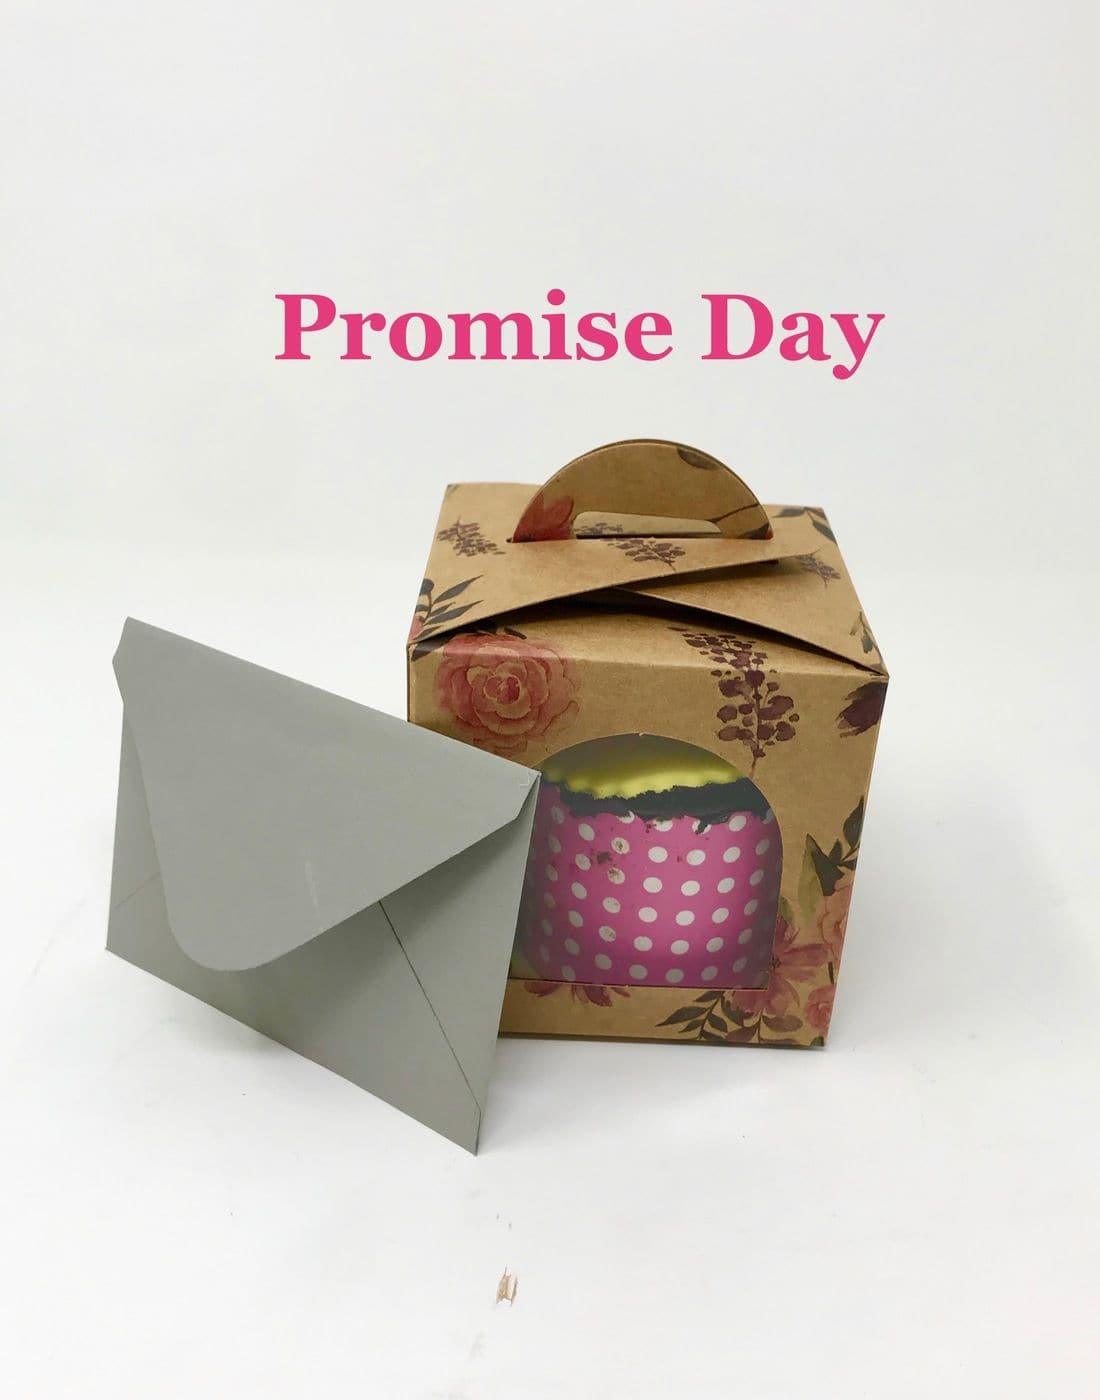 ME & YOU Gift for Valentine's Day-Romantic Gift for Wife/Girlfriend/Fiance|Unique  Promise